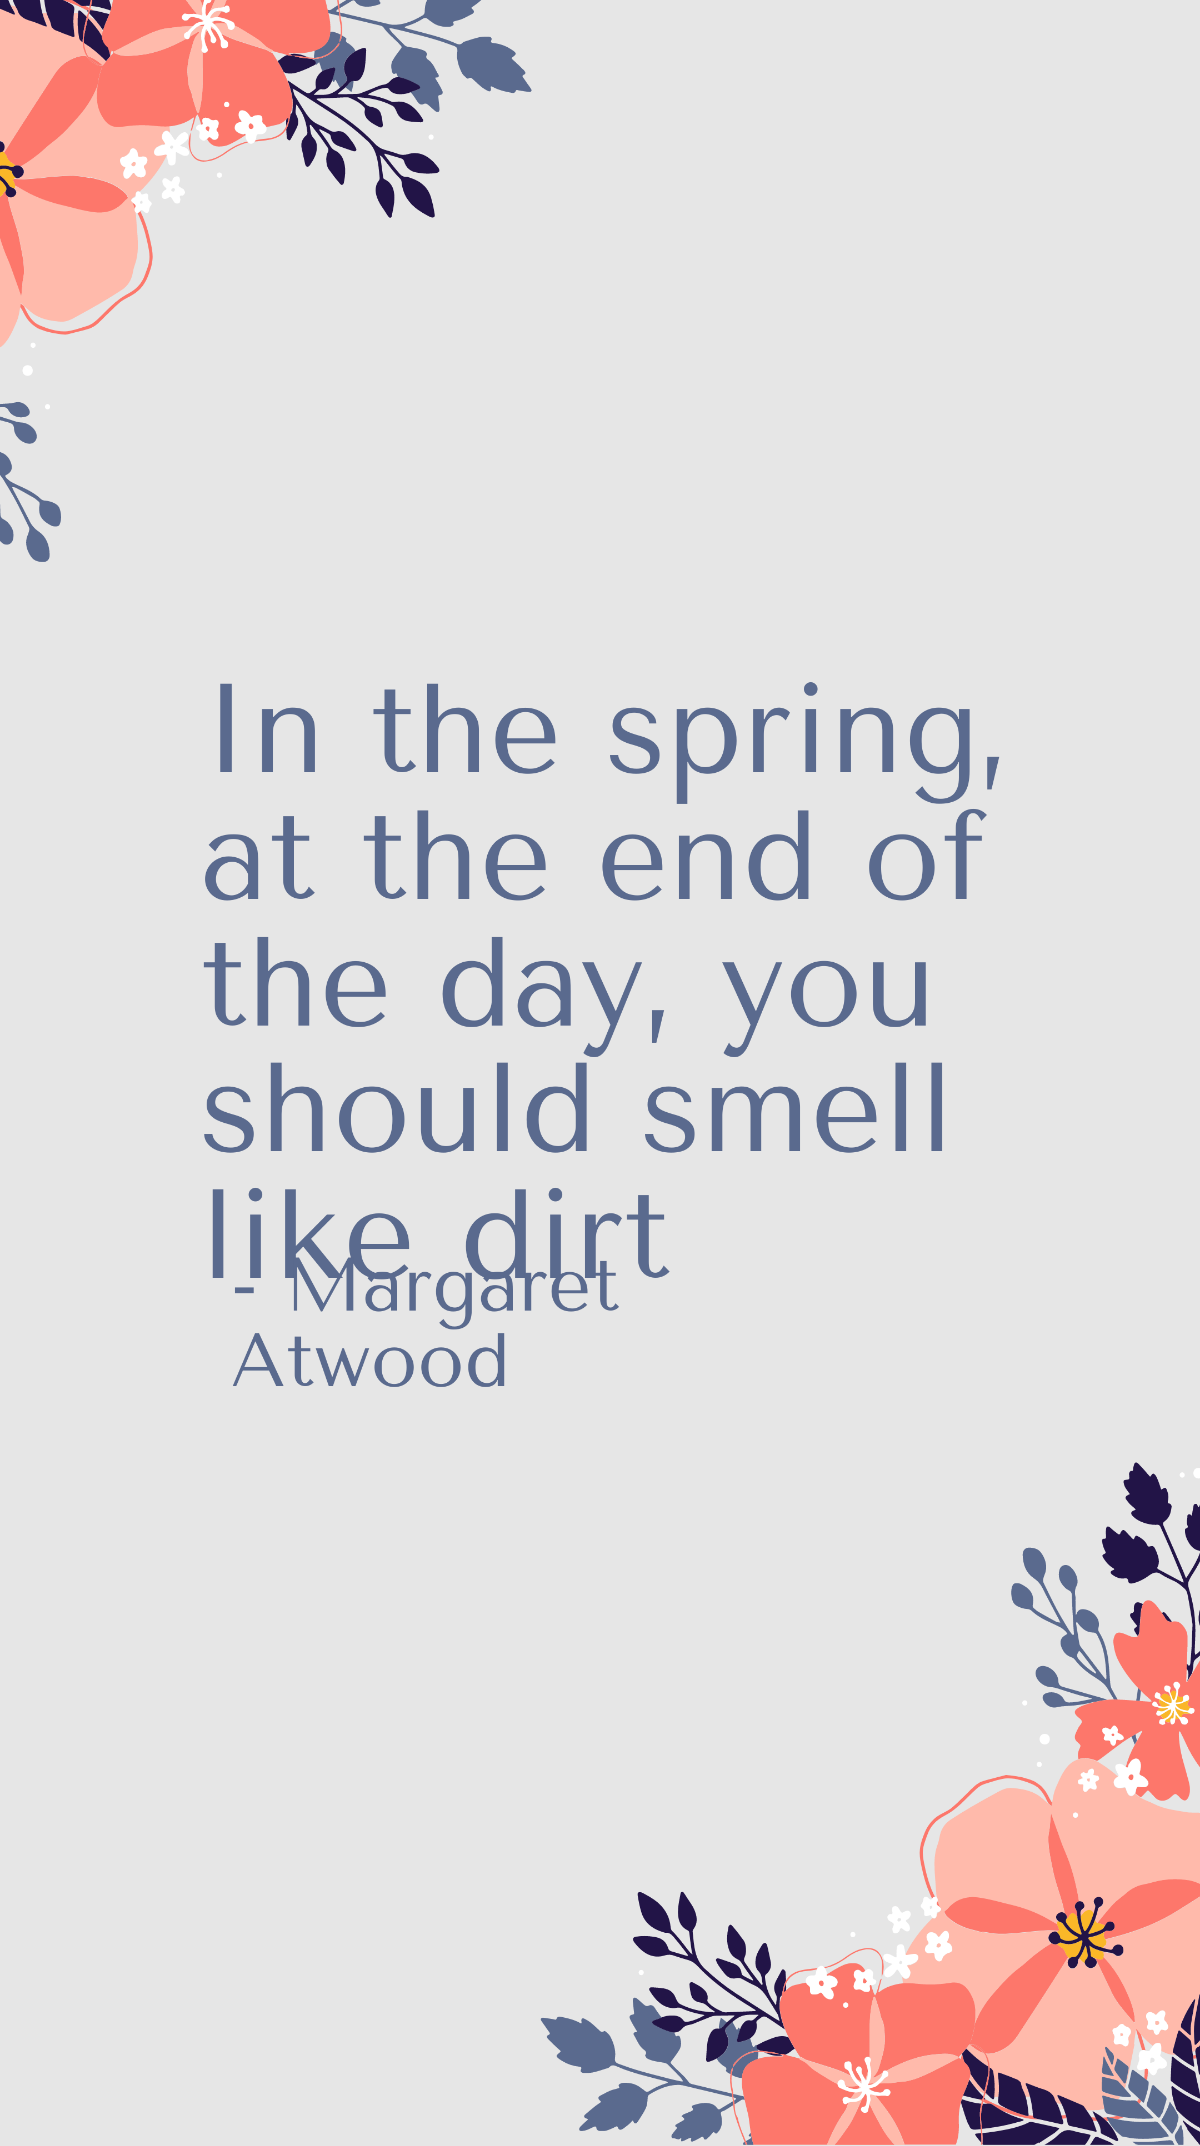 Margaret Atwood - In the spring, at the end of the day, you should smell like dirt